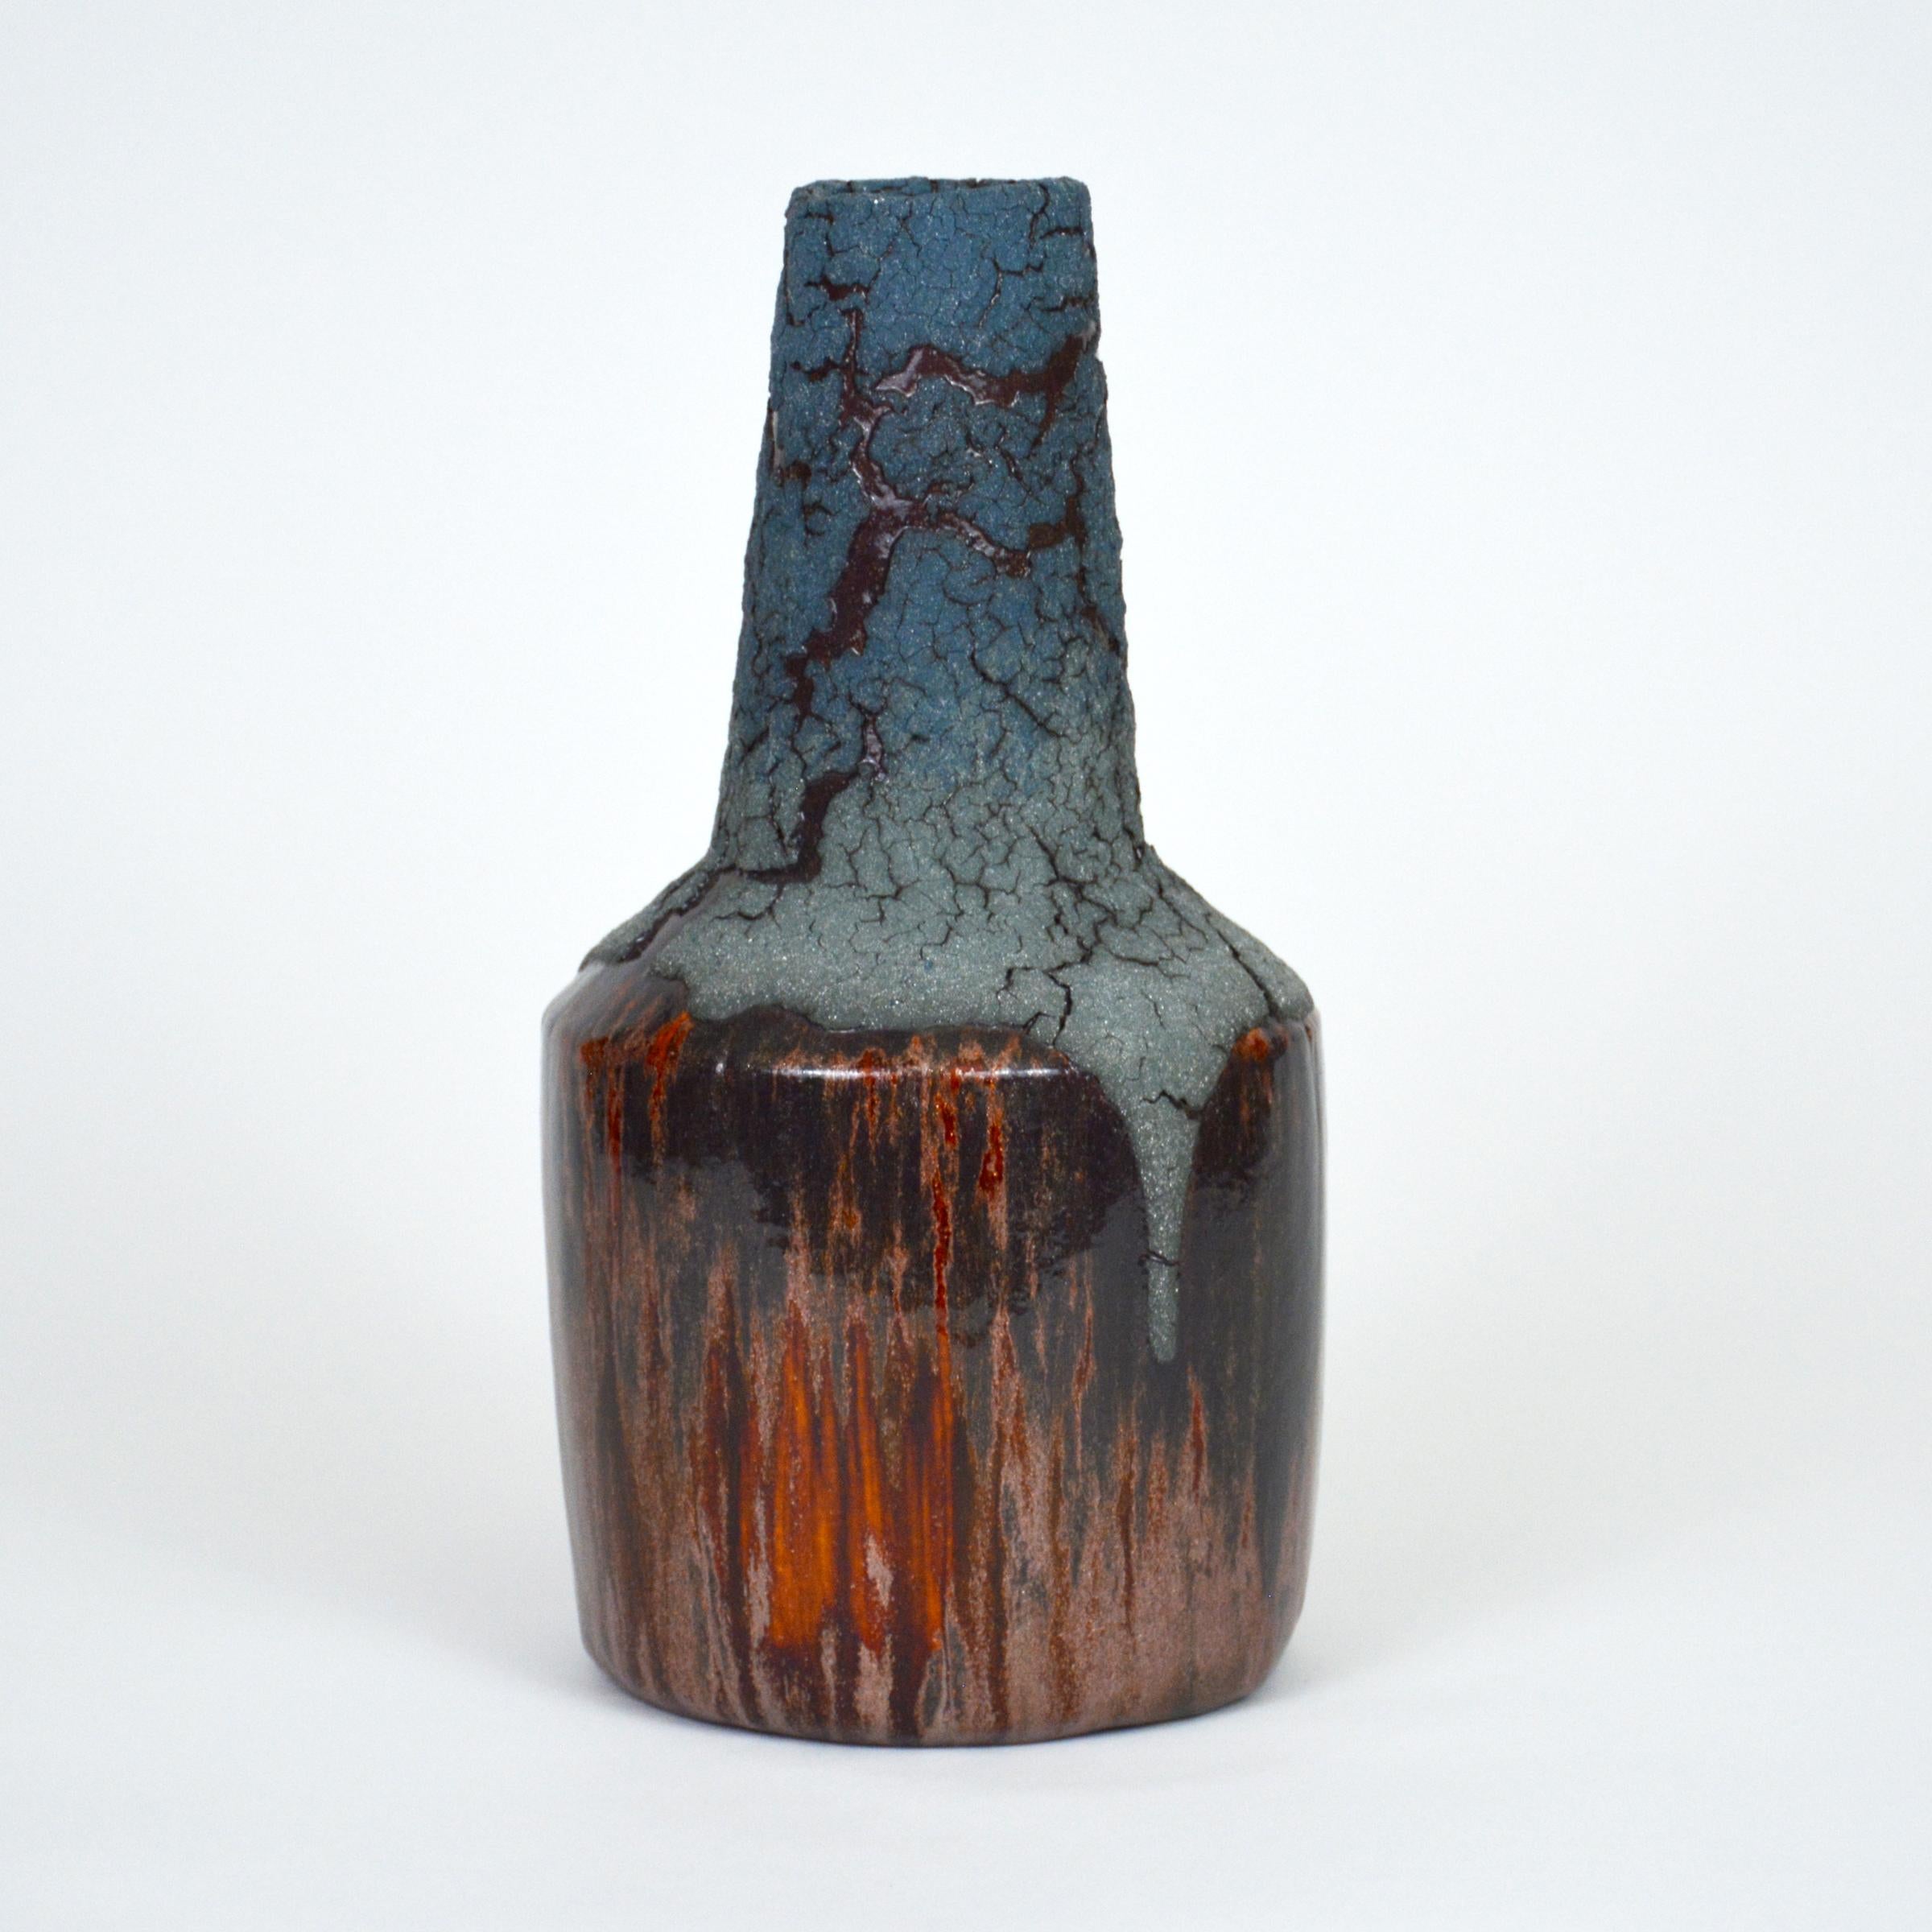 Blue Lava ceramic bottle by William Edwards
Hand built earthenware vessel, fired multiple times to achieve a textured surface of random abstraction, matte blues with shades of amber gloss metallic microcrystalline glaze breaking through that